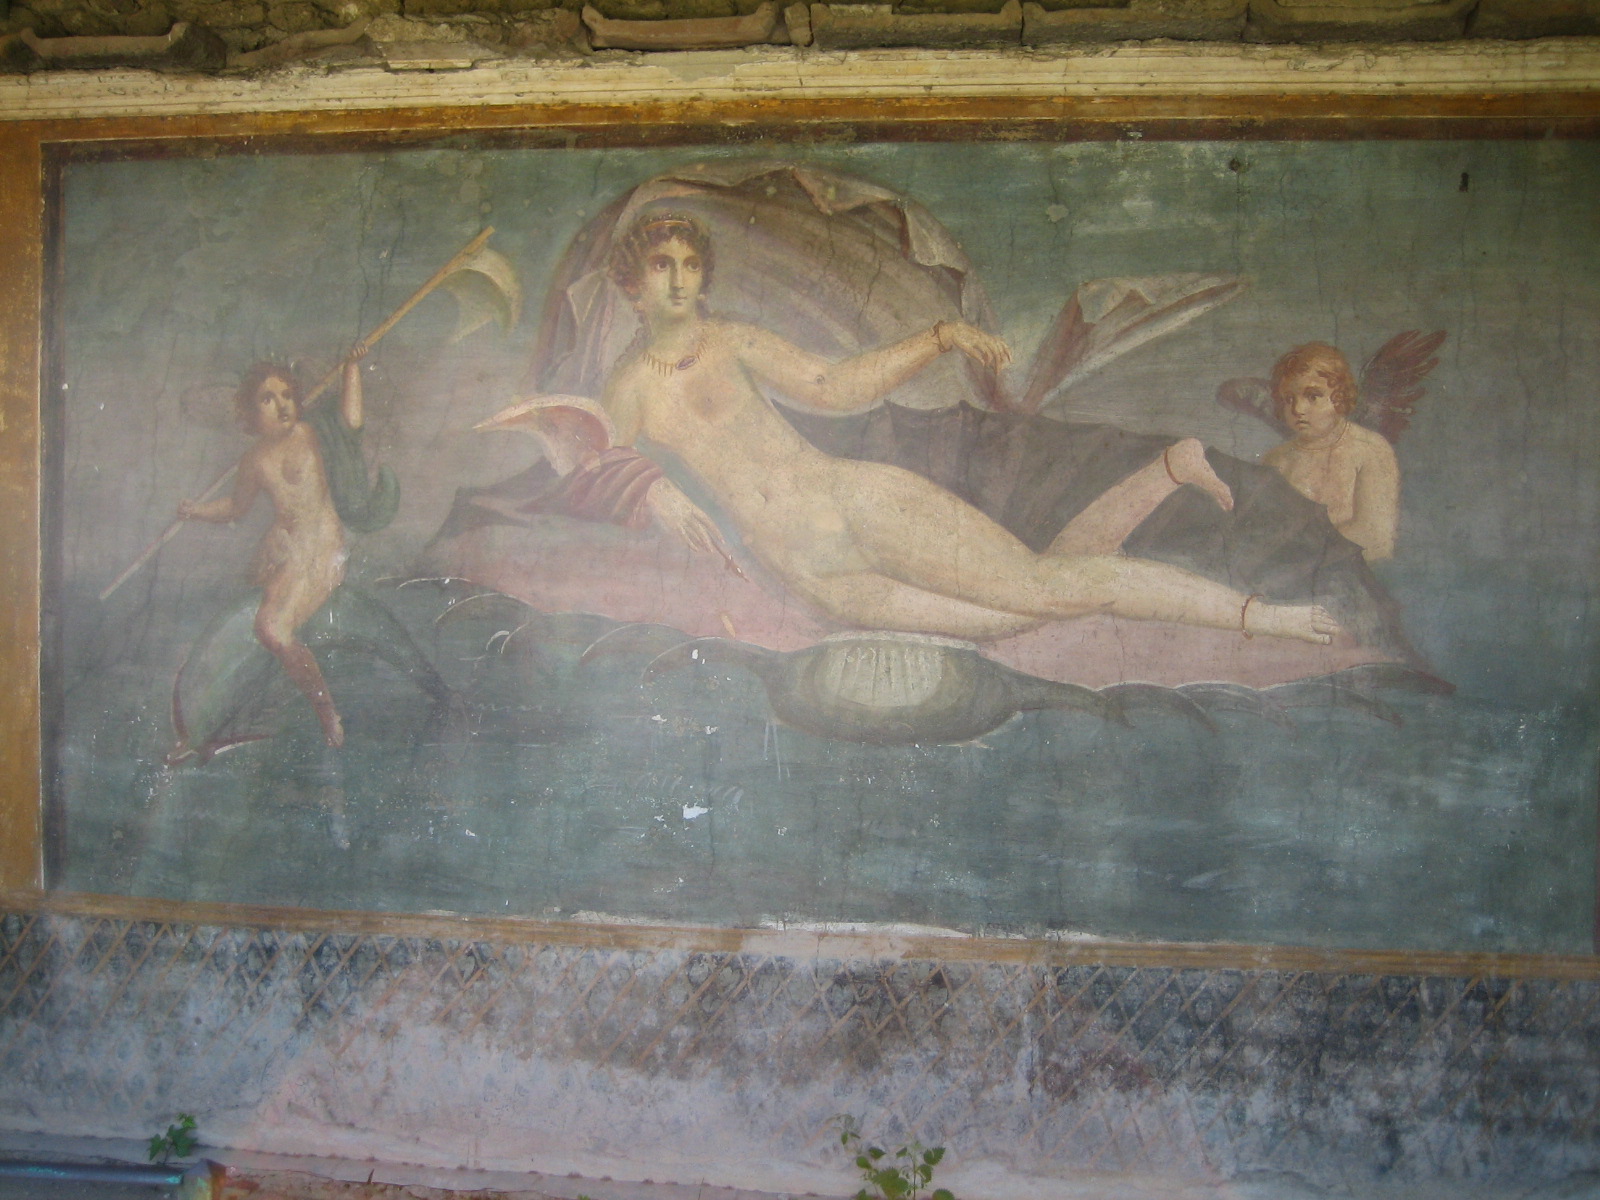 a painting depicting  women holding spears is shown in an old wall